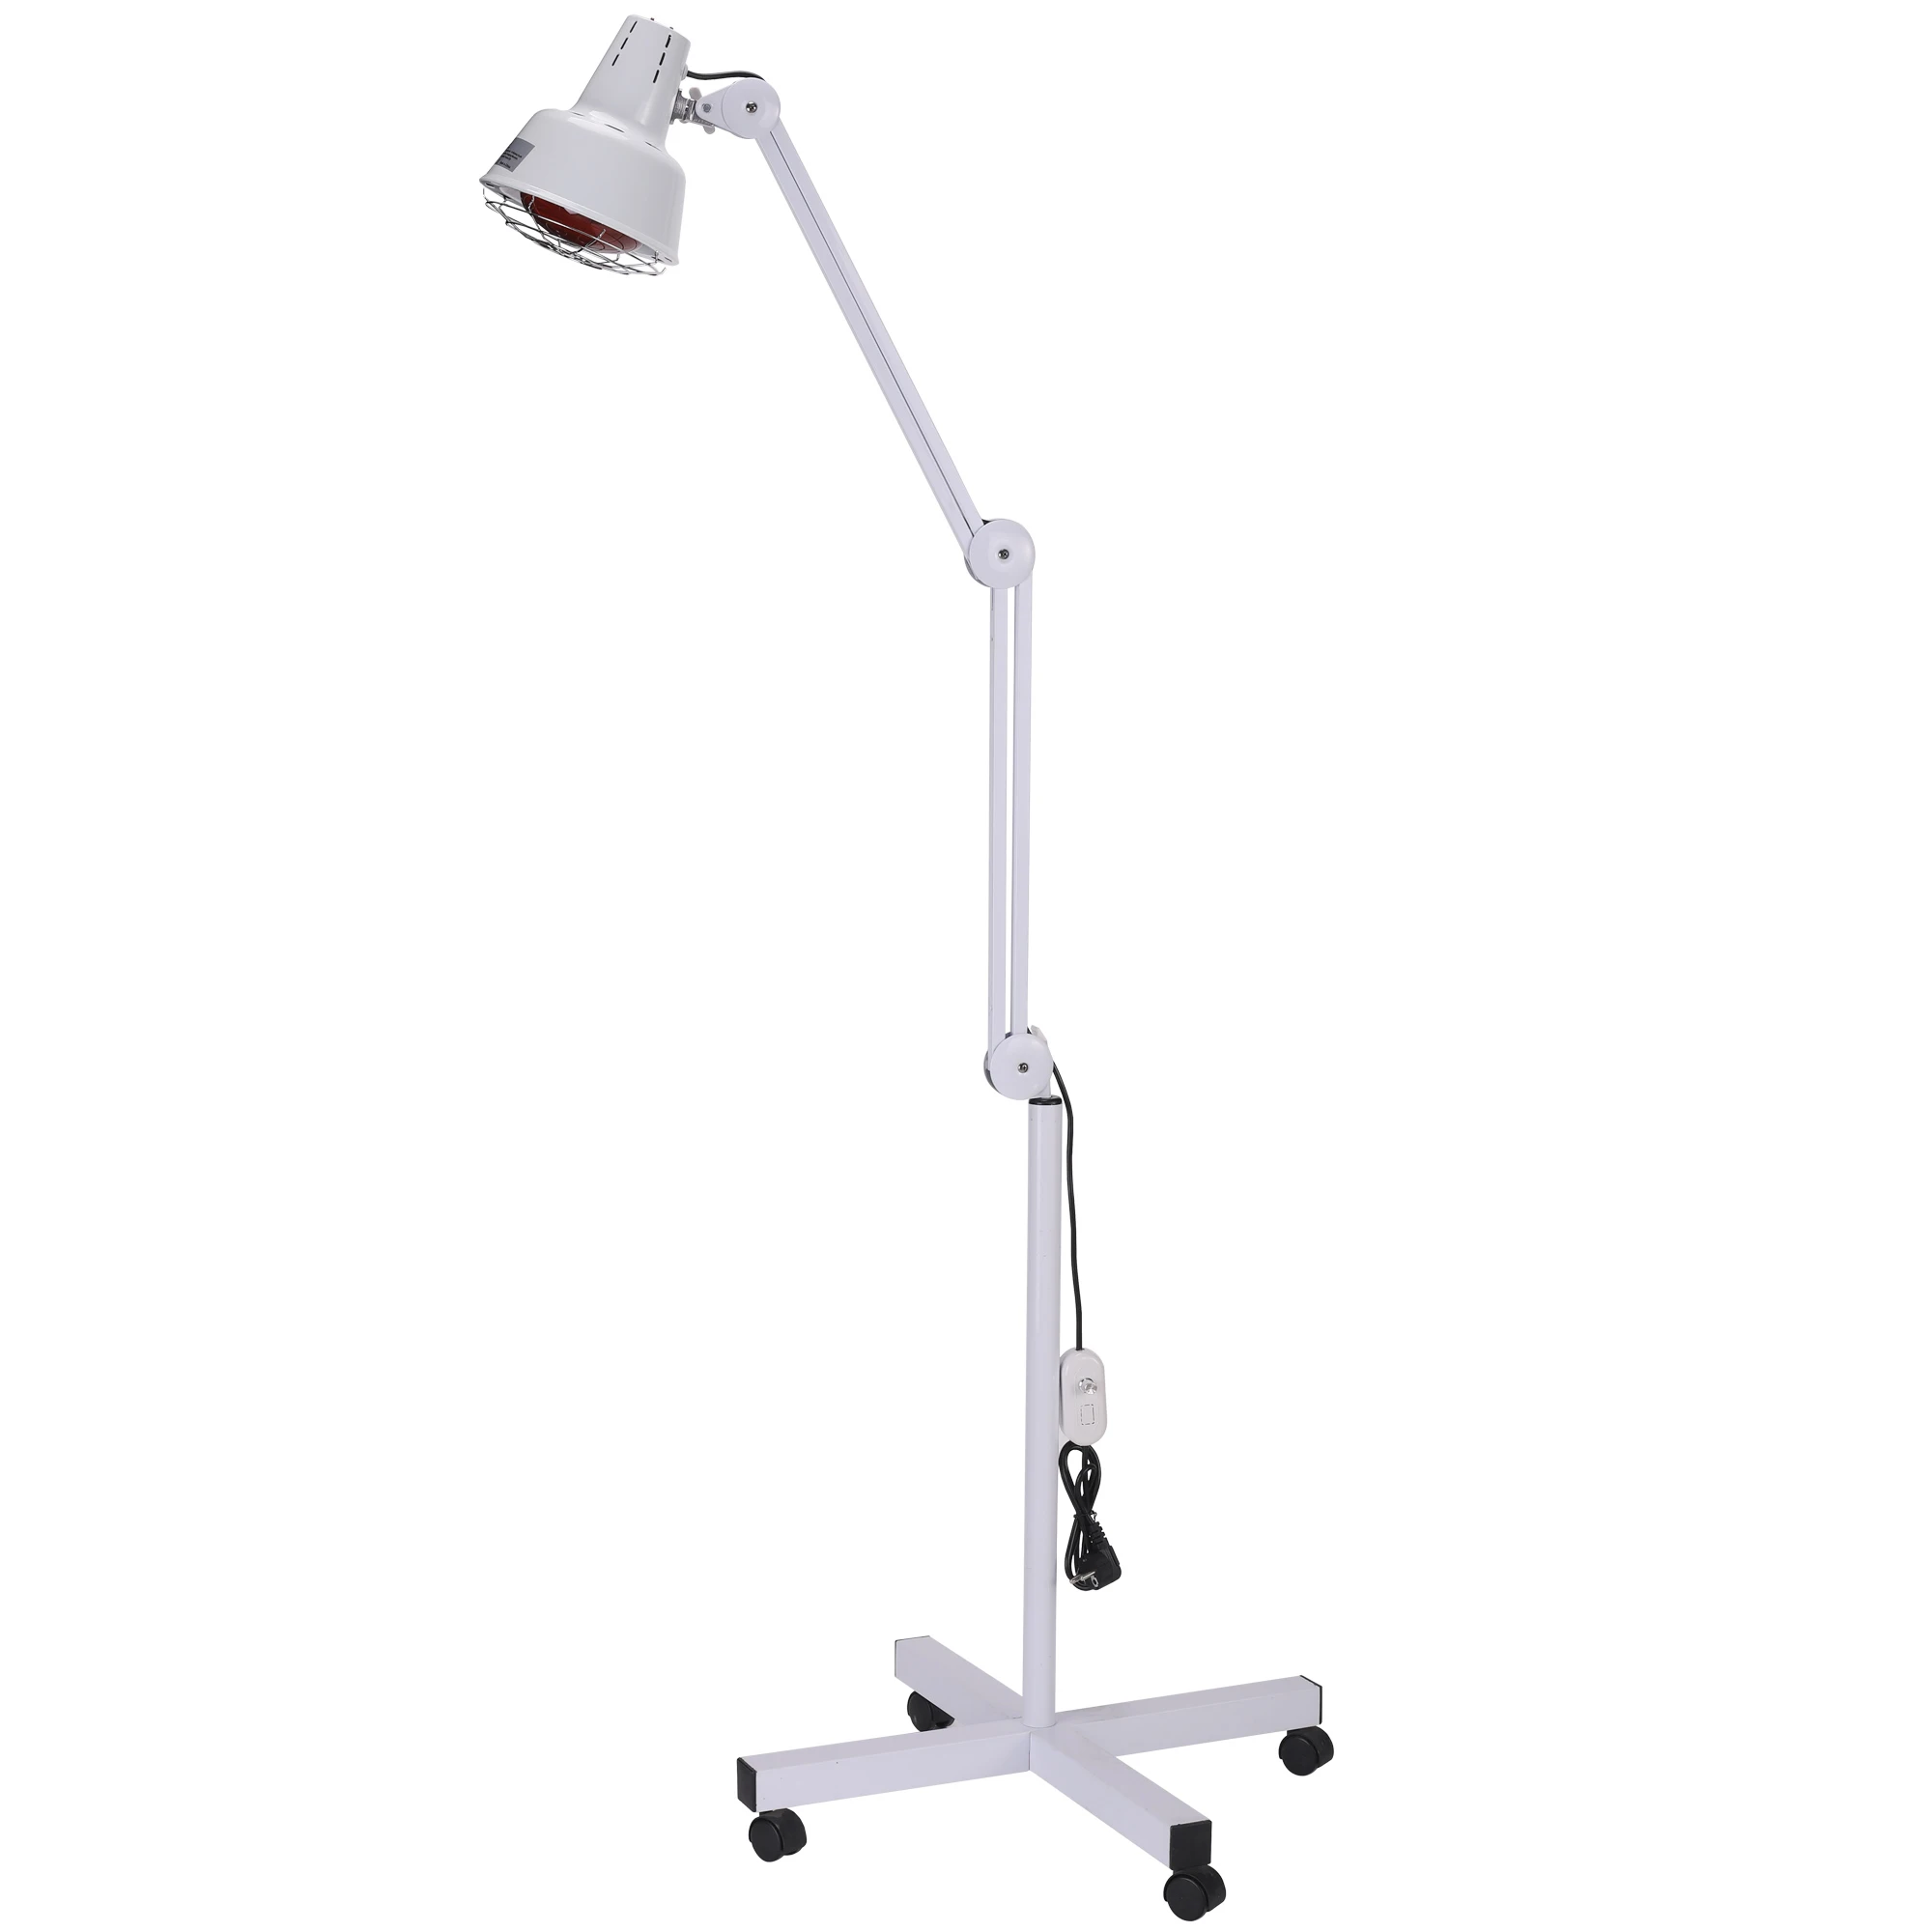 China Supplier Red Light Therapy Lamp,Hot Sale Infrared Light Therapy Device With Cross Foot